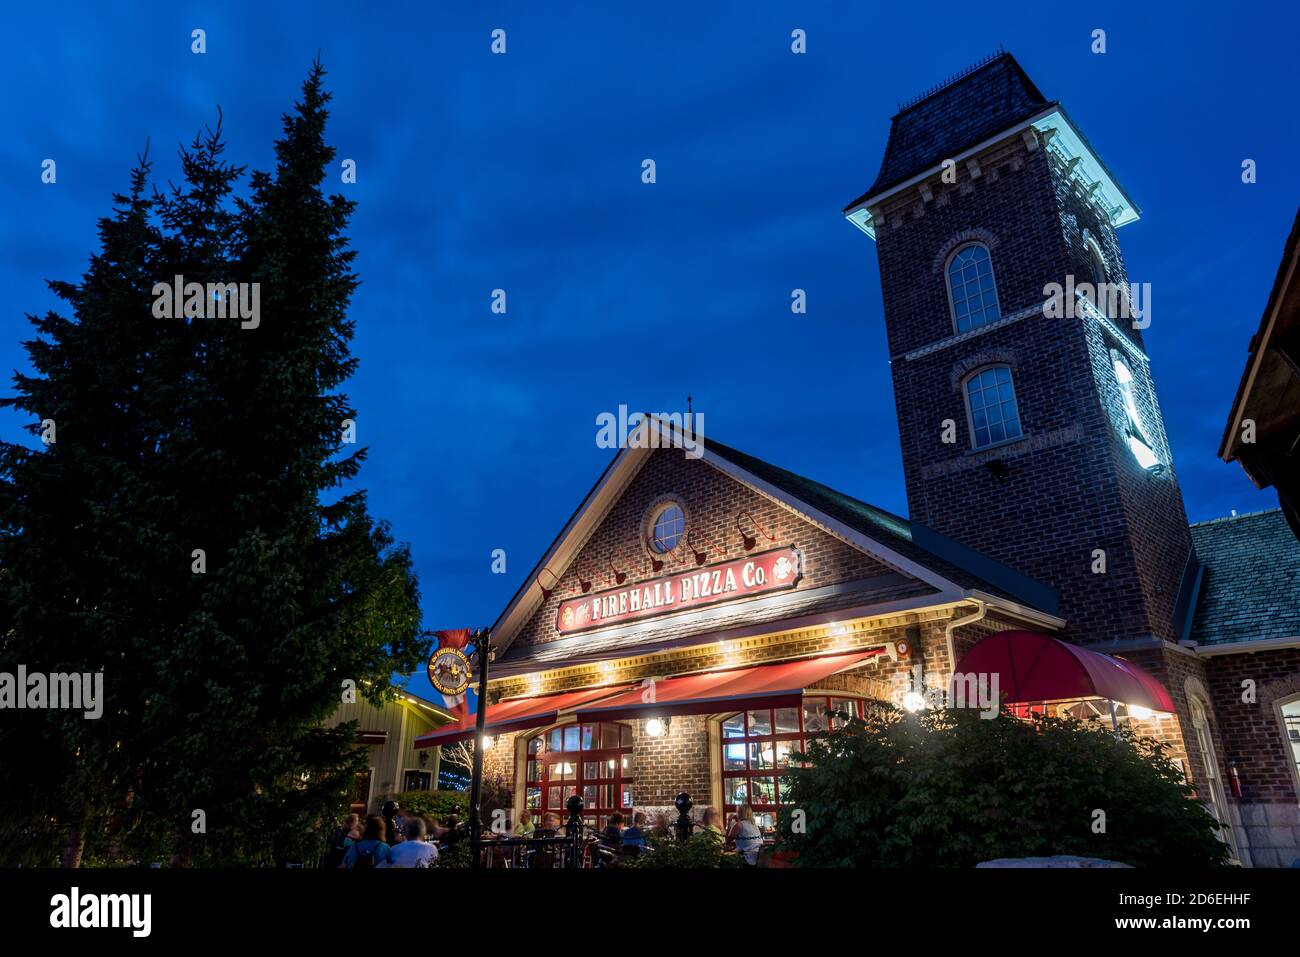 A night scene of Fire hall pizza restaurant at Blue mountain village. Stock Photo